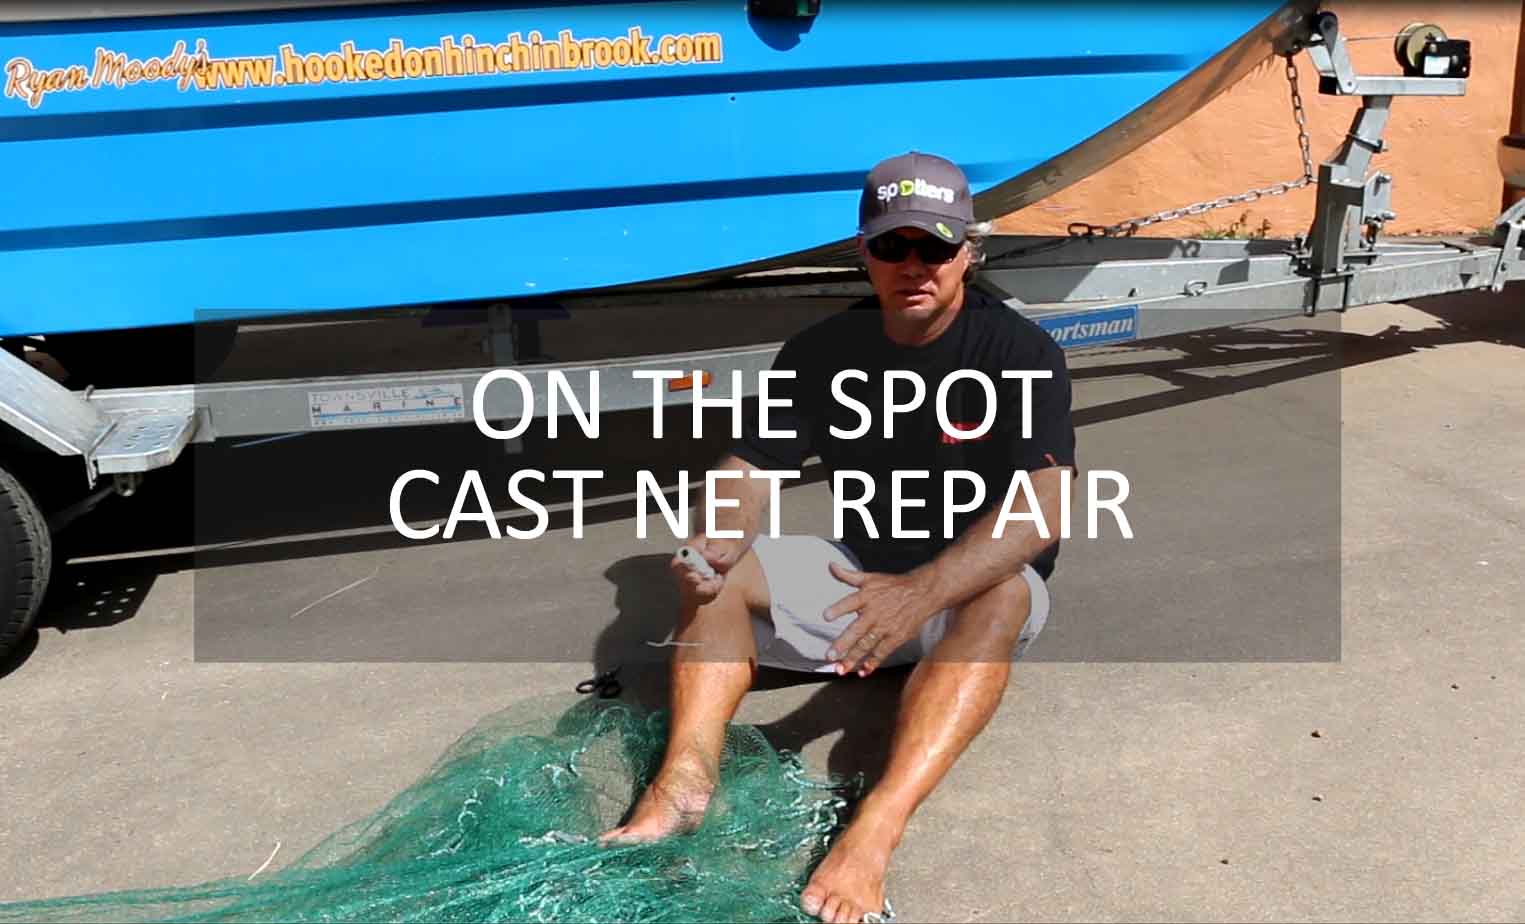 Cast_net_repair-with-text